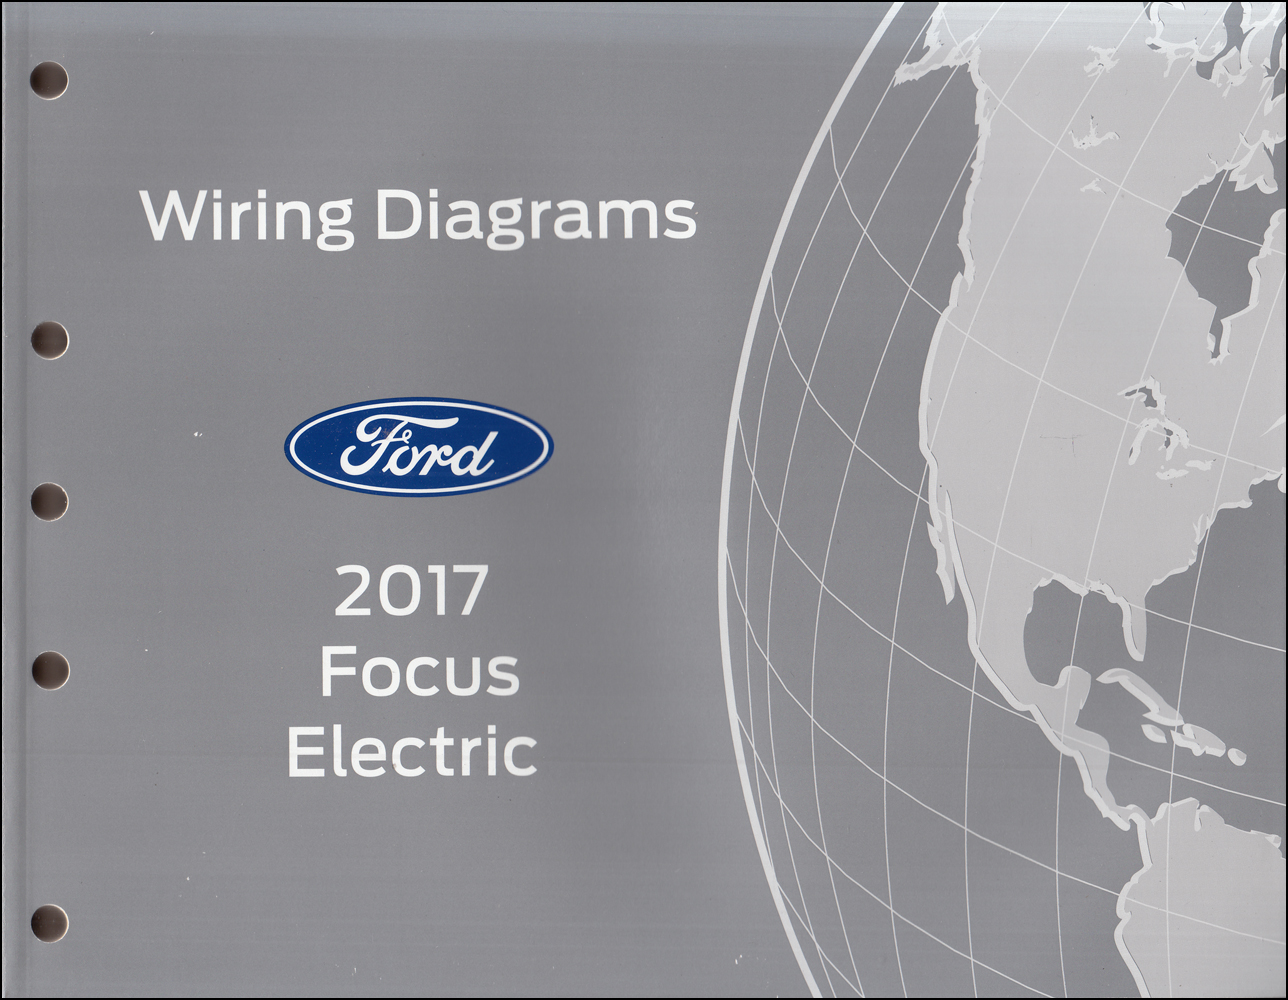 Wiring Diagram For A Ford Focus from www.faxonautoliterature.com